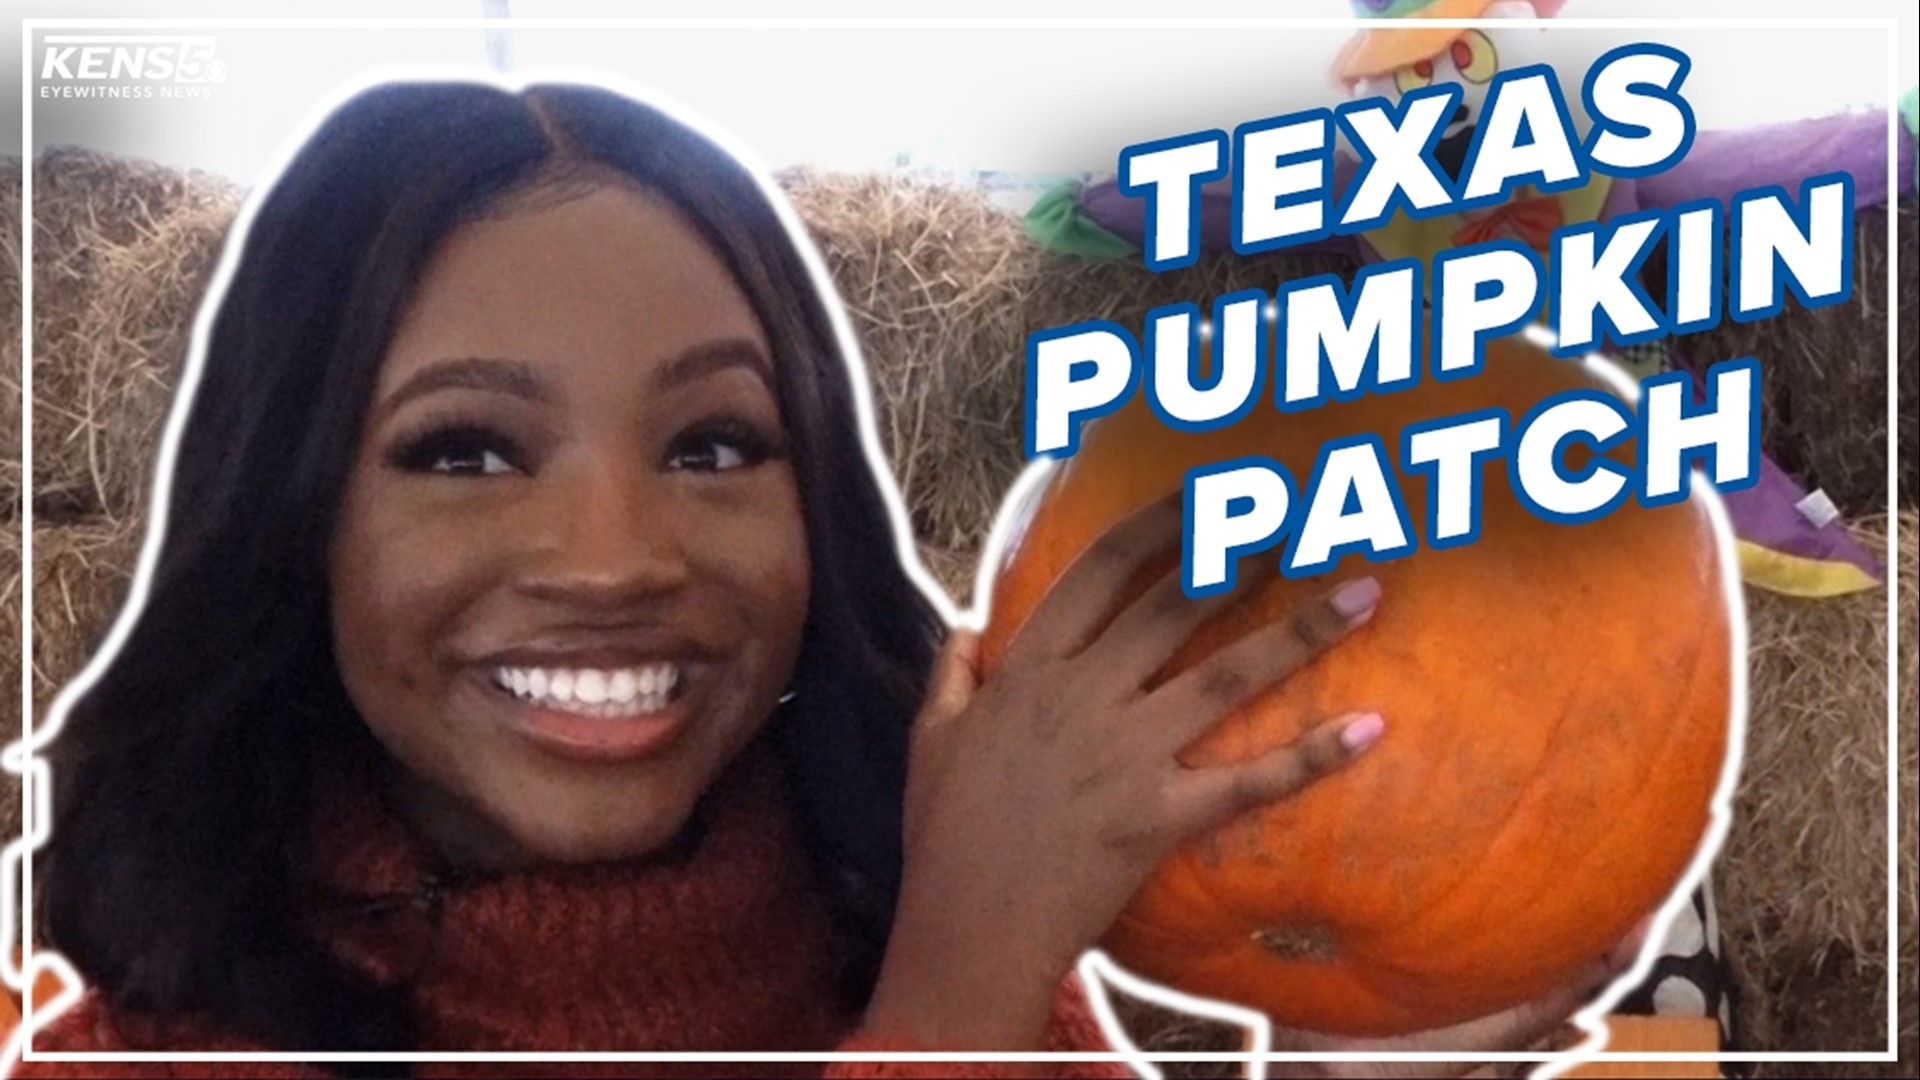 Is it Christmas yet? No. But, it is close to Halloween, and pumpkin patches around San Antonio have started to close. Here's one you can still visit. 🎃